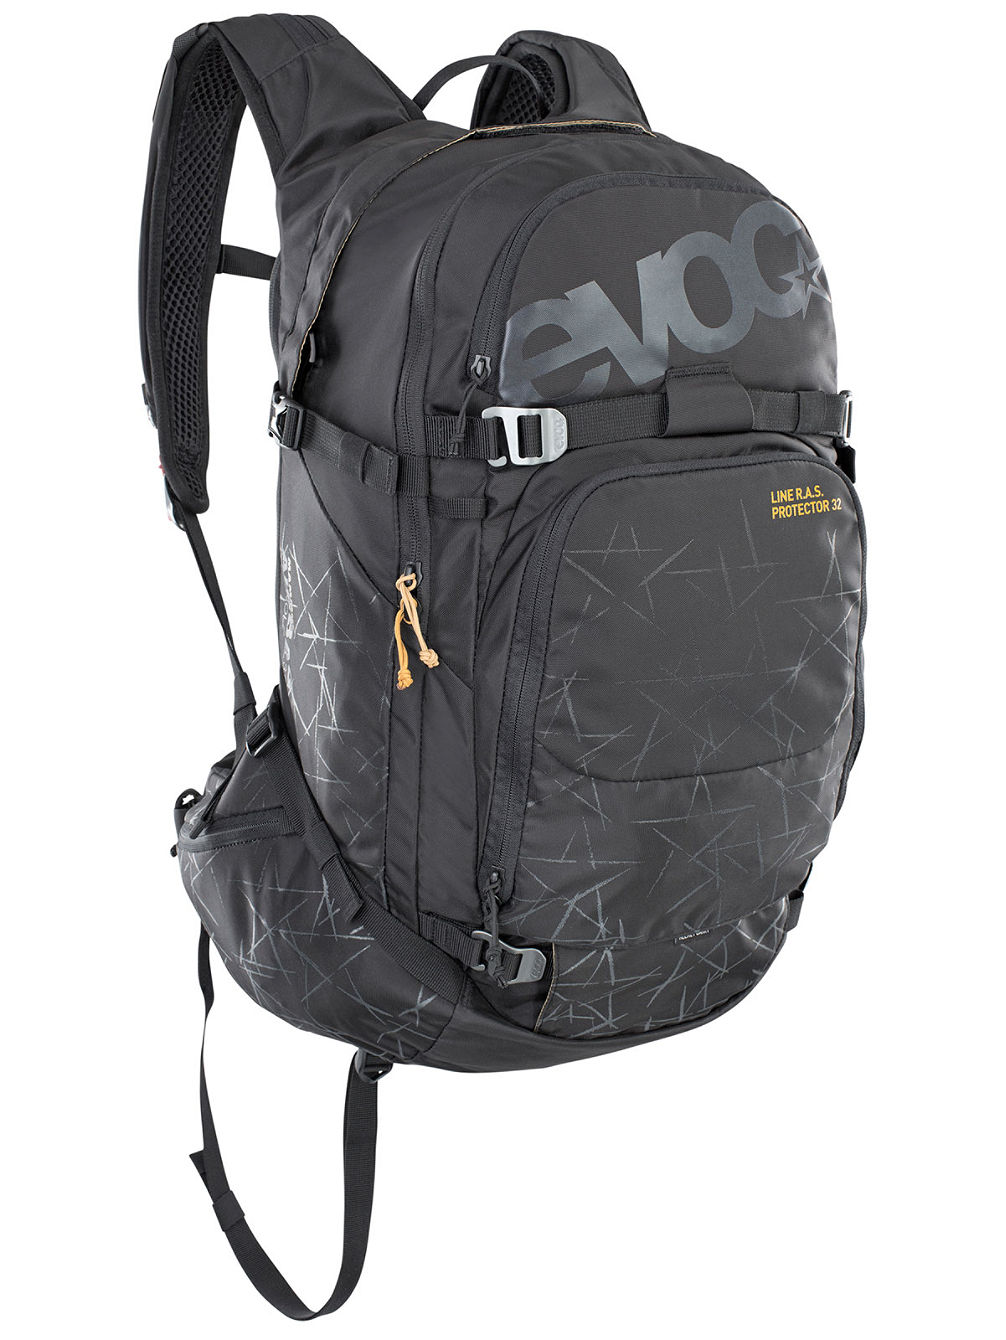 Line R.A.S. Protector 32L Rucksack